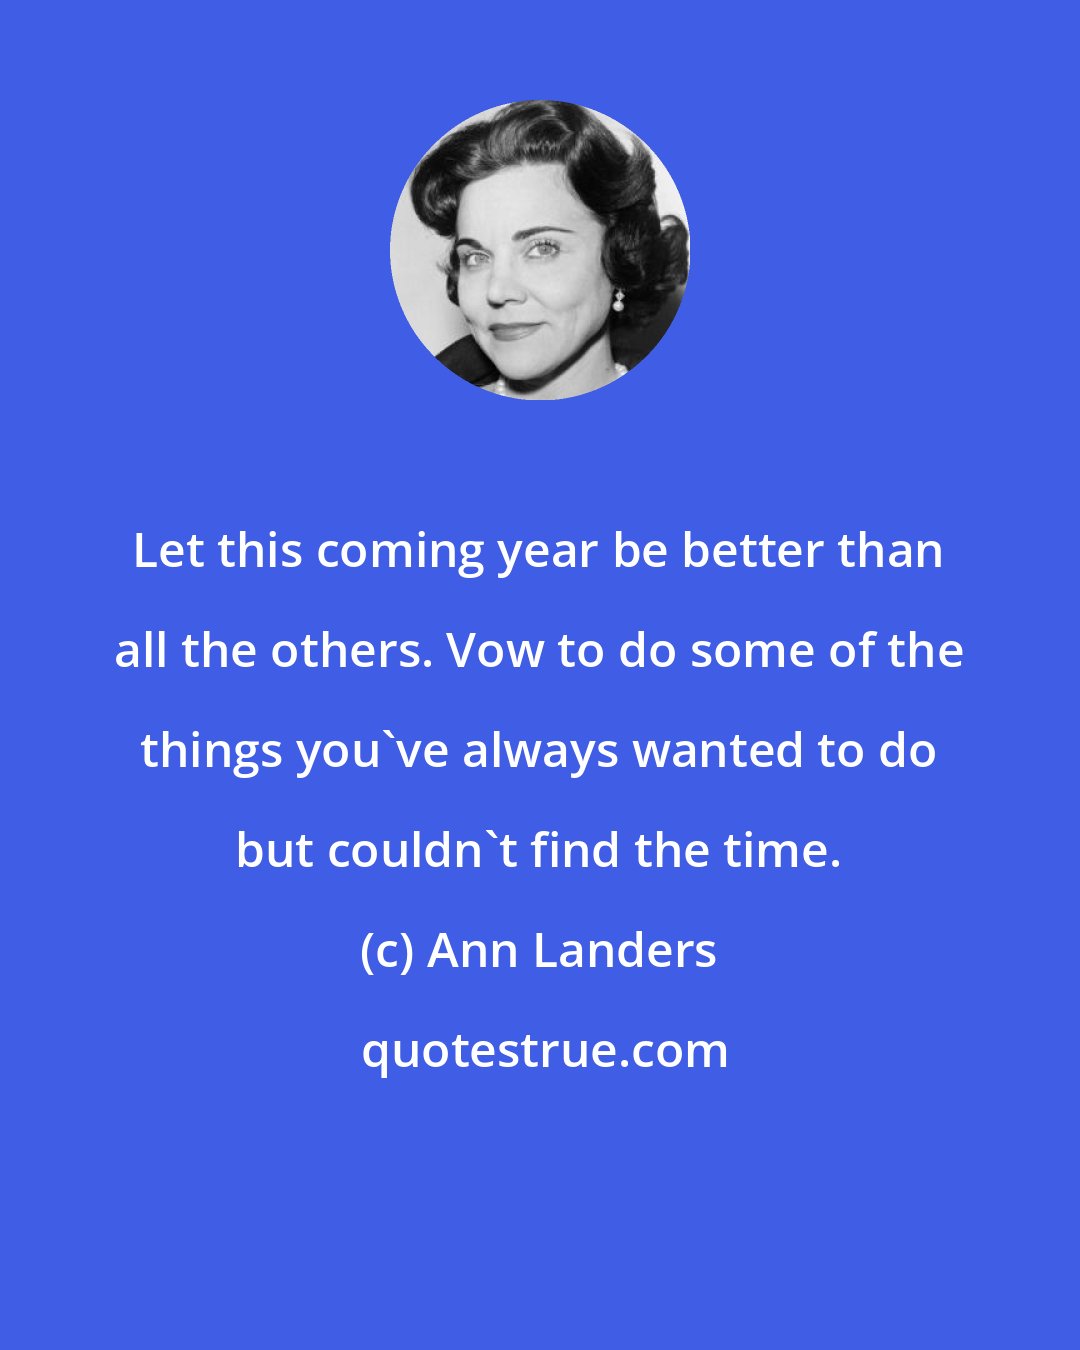 Ann Landers: Let this coming year be better than all the others. Vow to do some of the things you've always wanted to do but couldn't find the time.